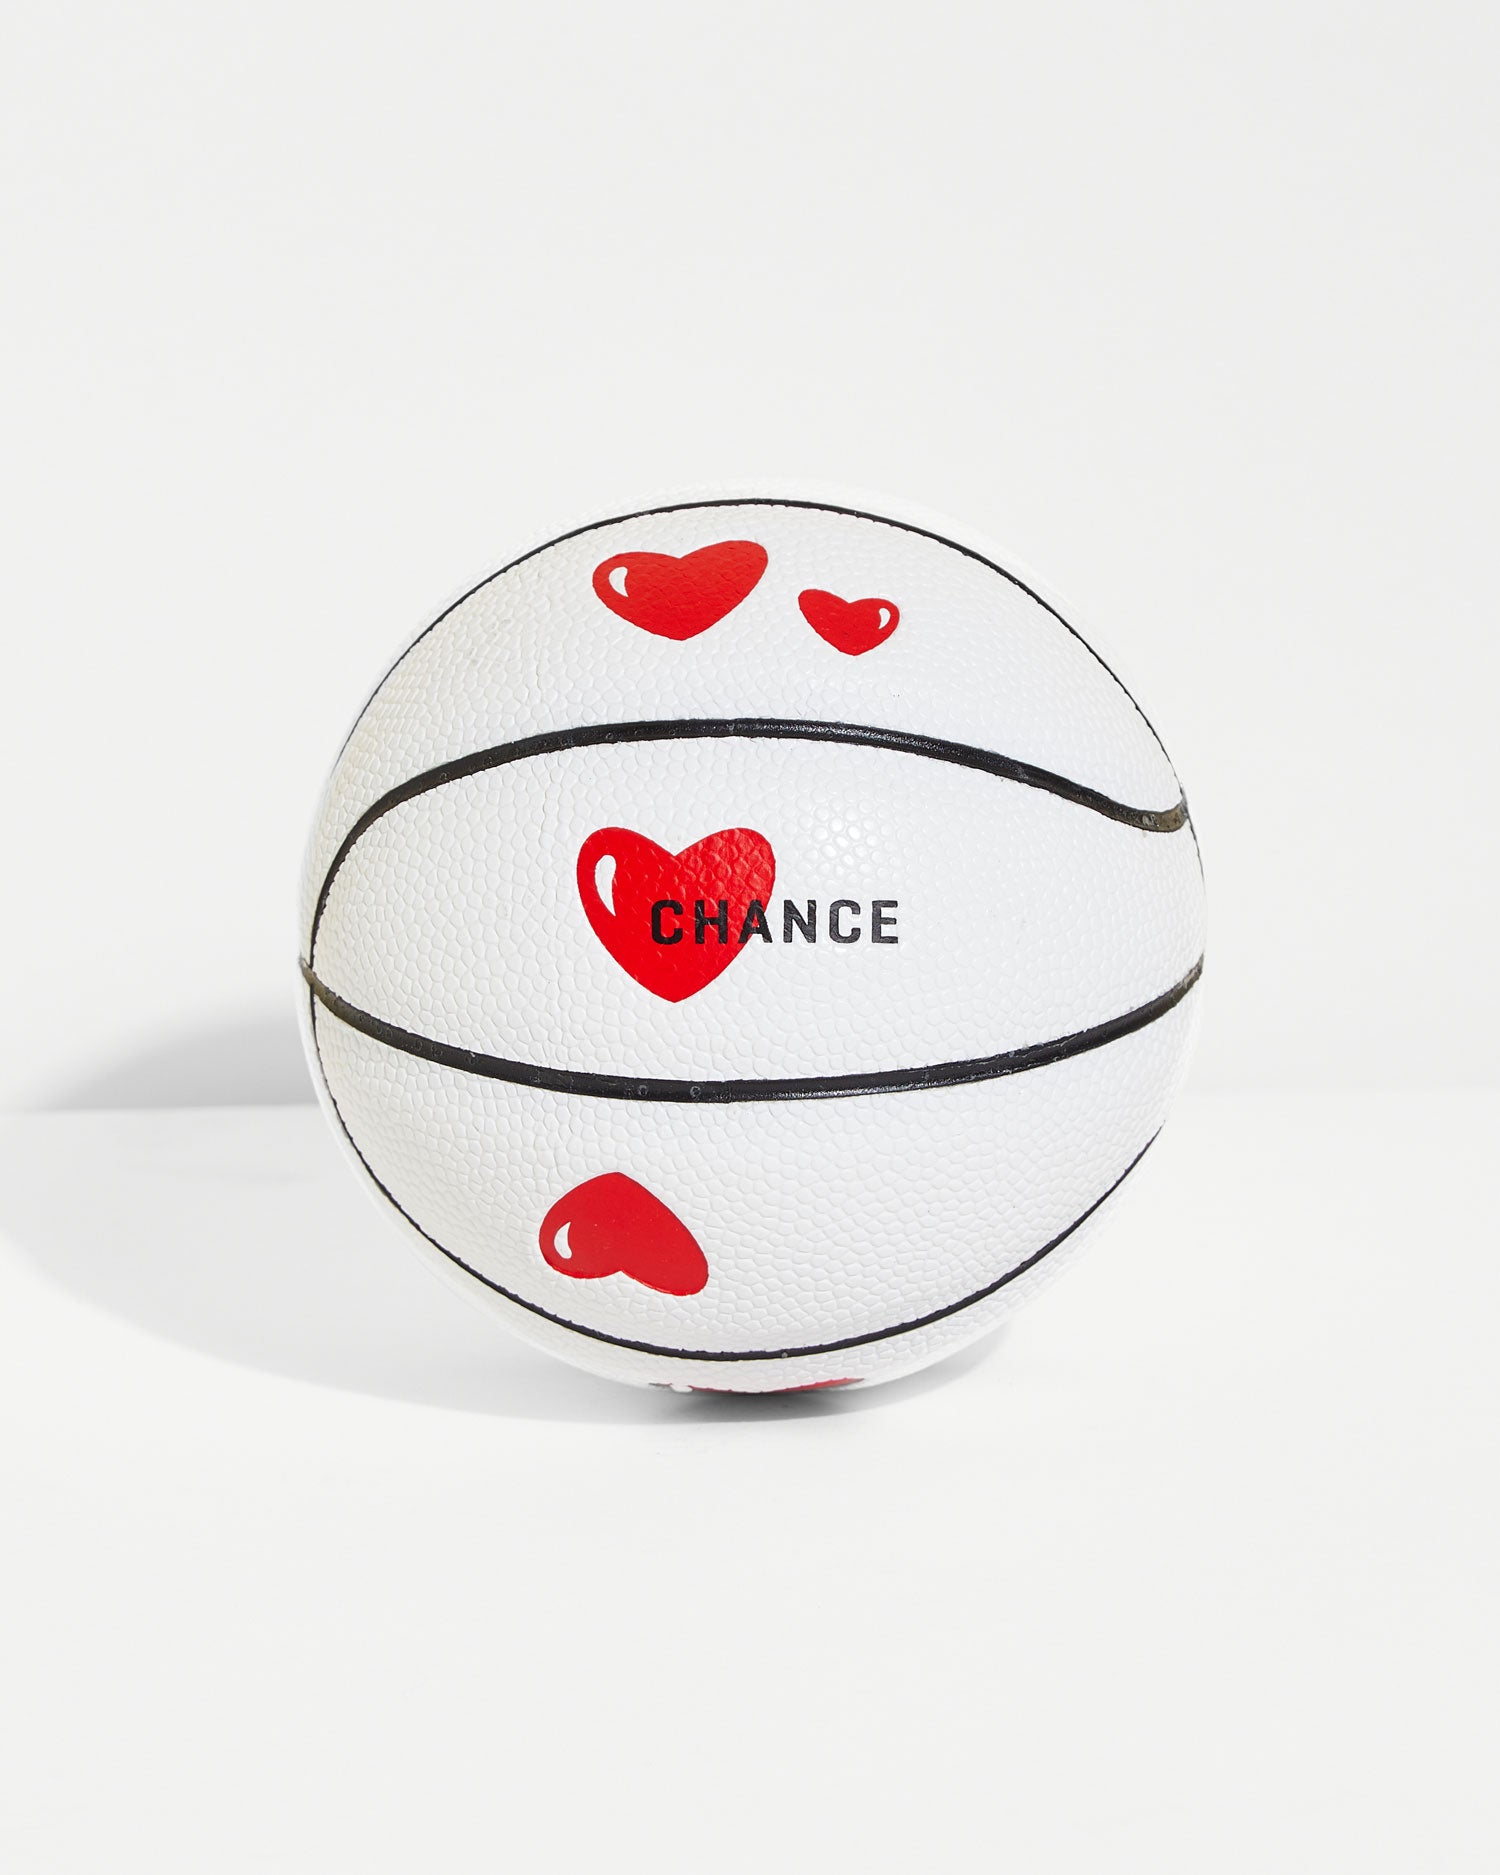 FLWRPWR Mini Composite Leather Basketball – Chance